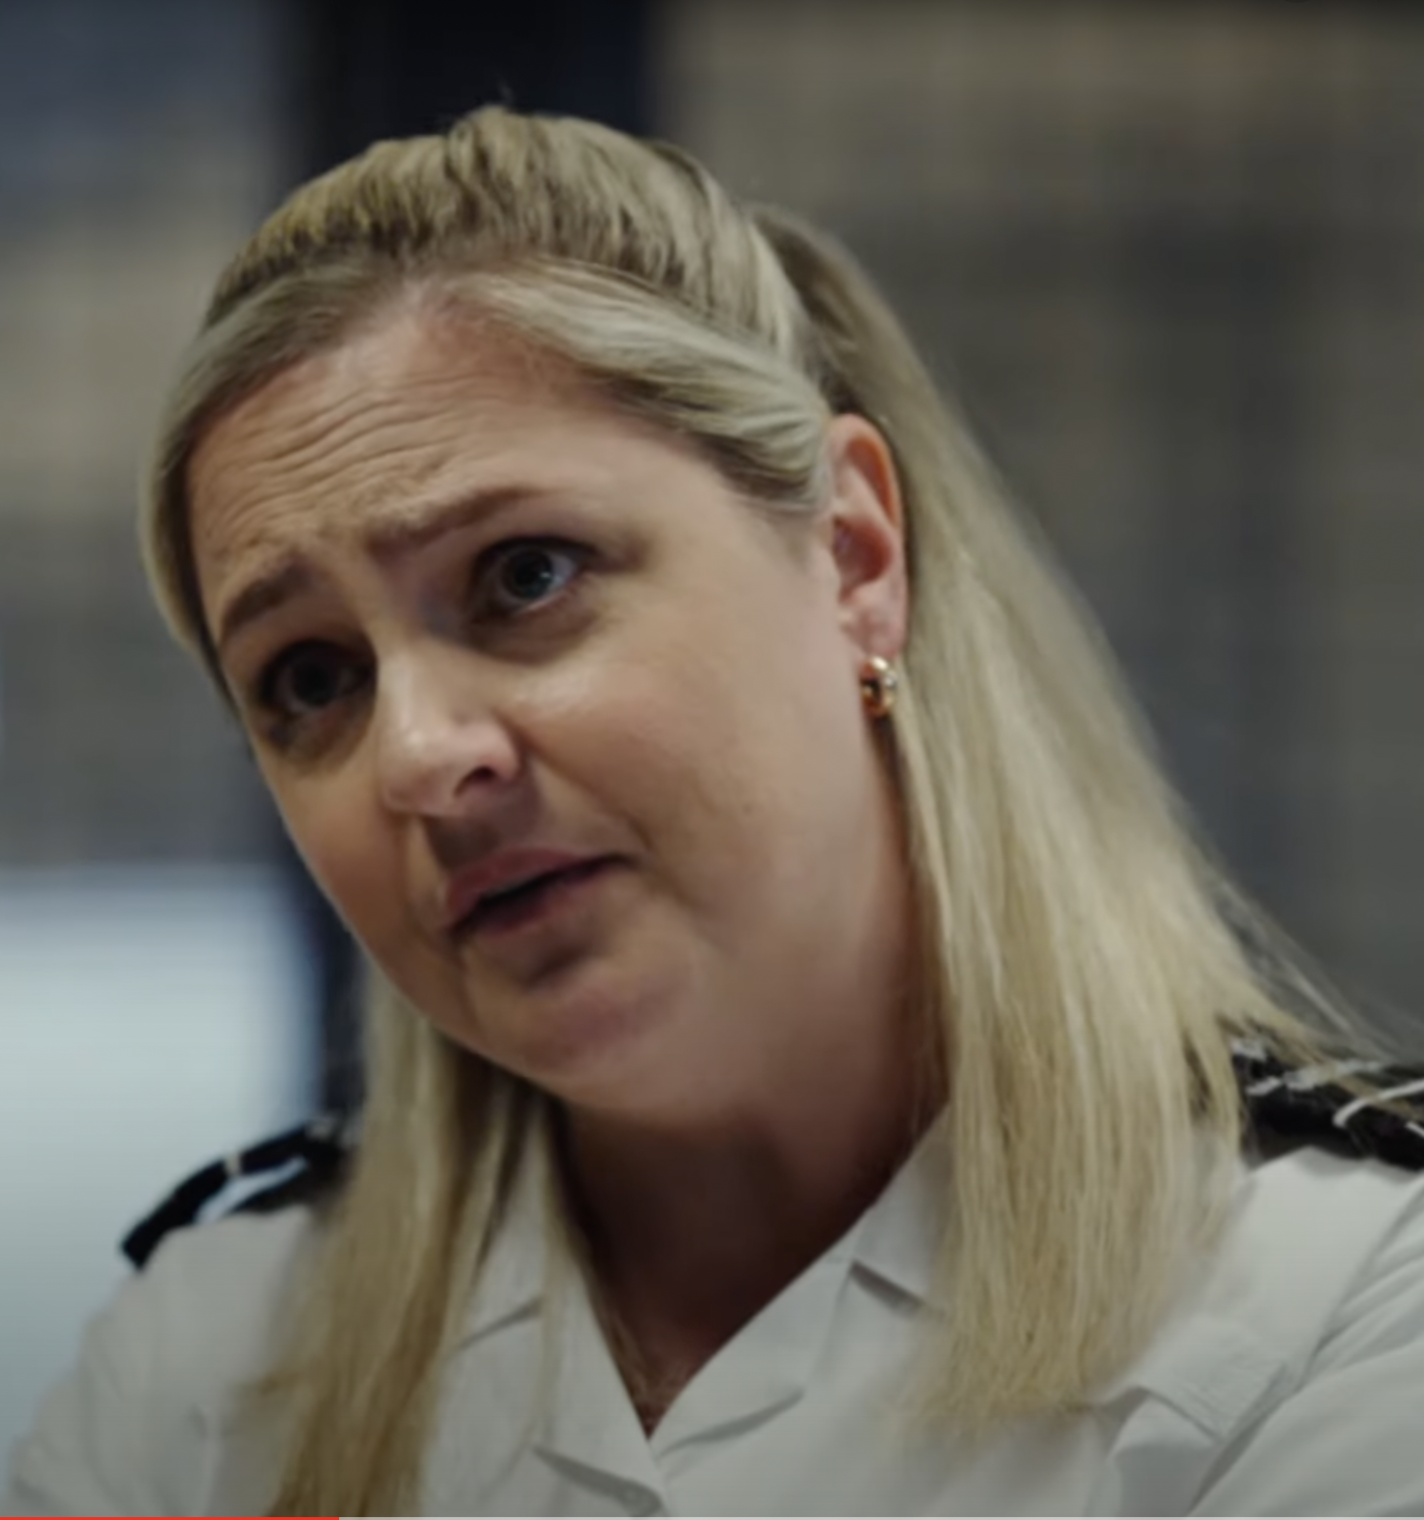 Channel 4 has released the first trailer for darkly comic prison drama Screw starring Laura Checkley